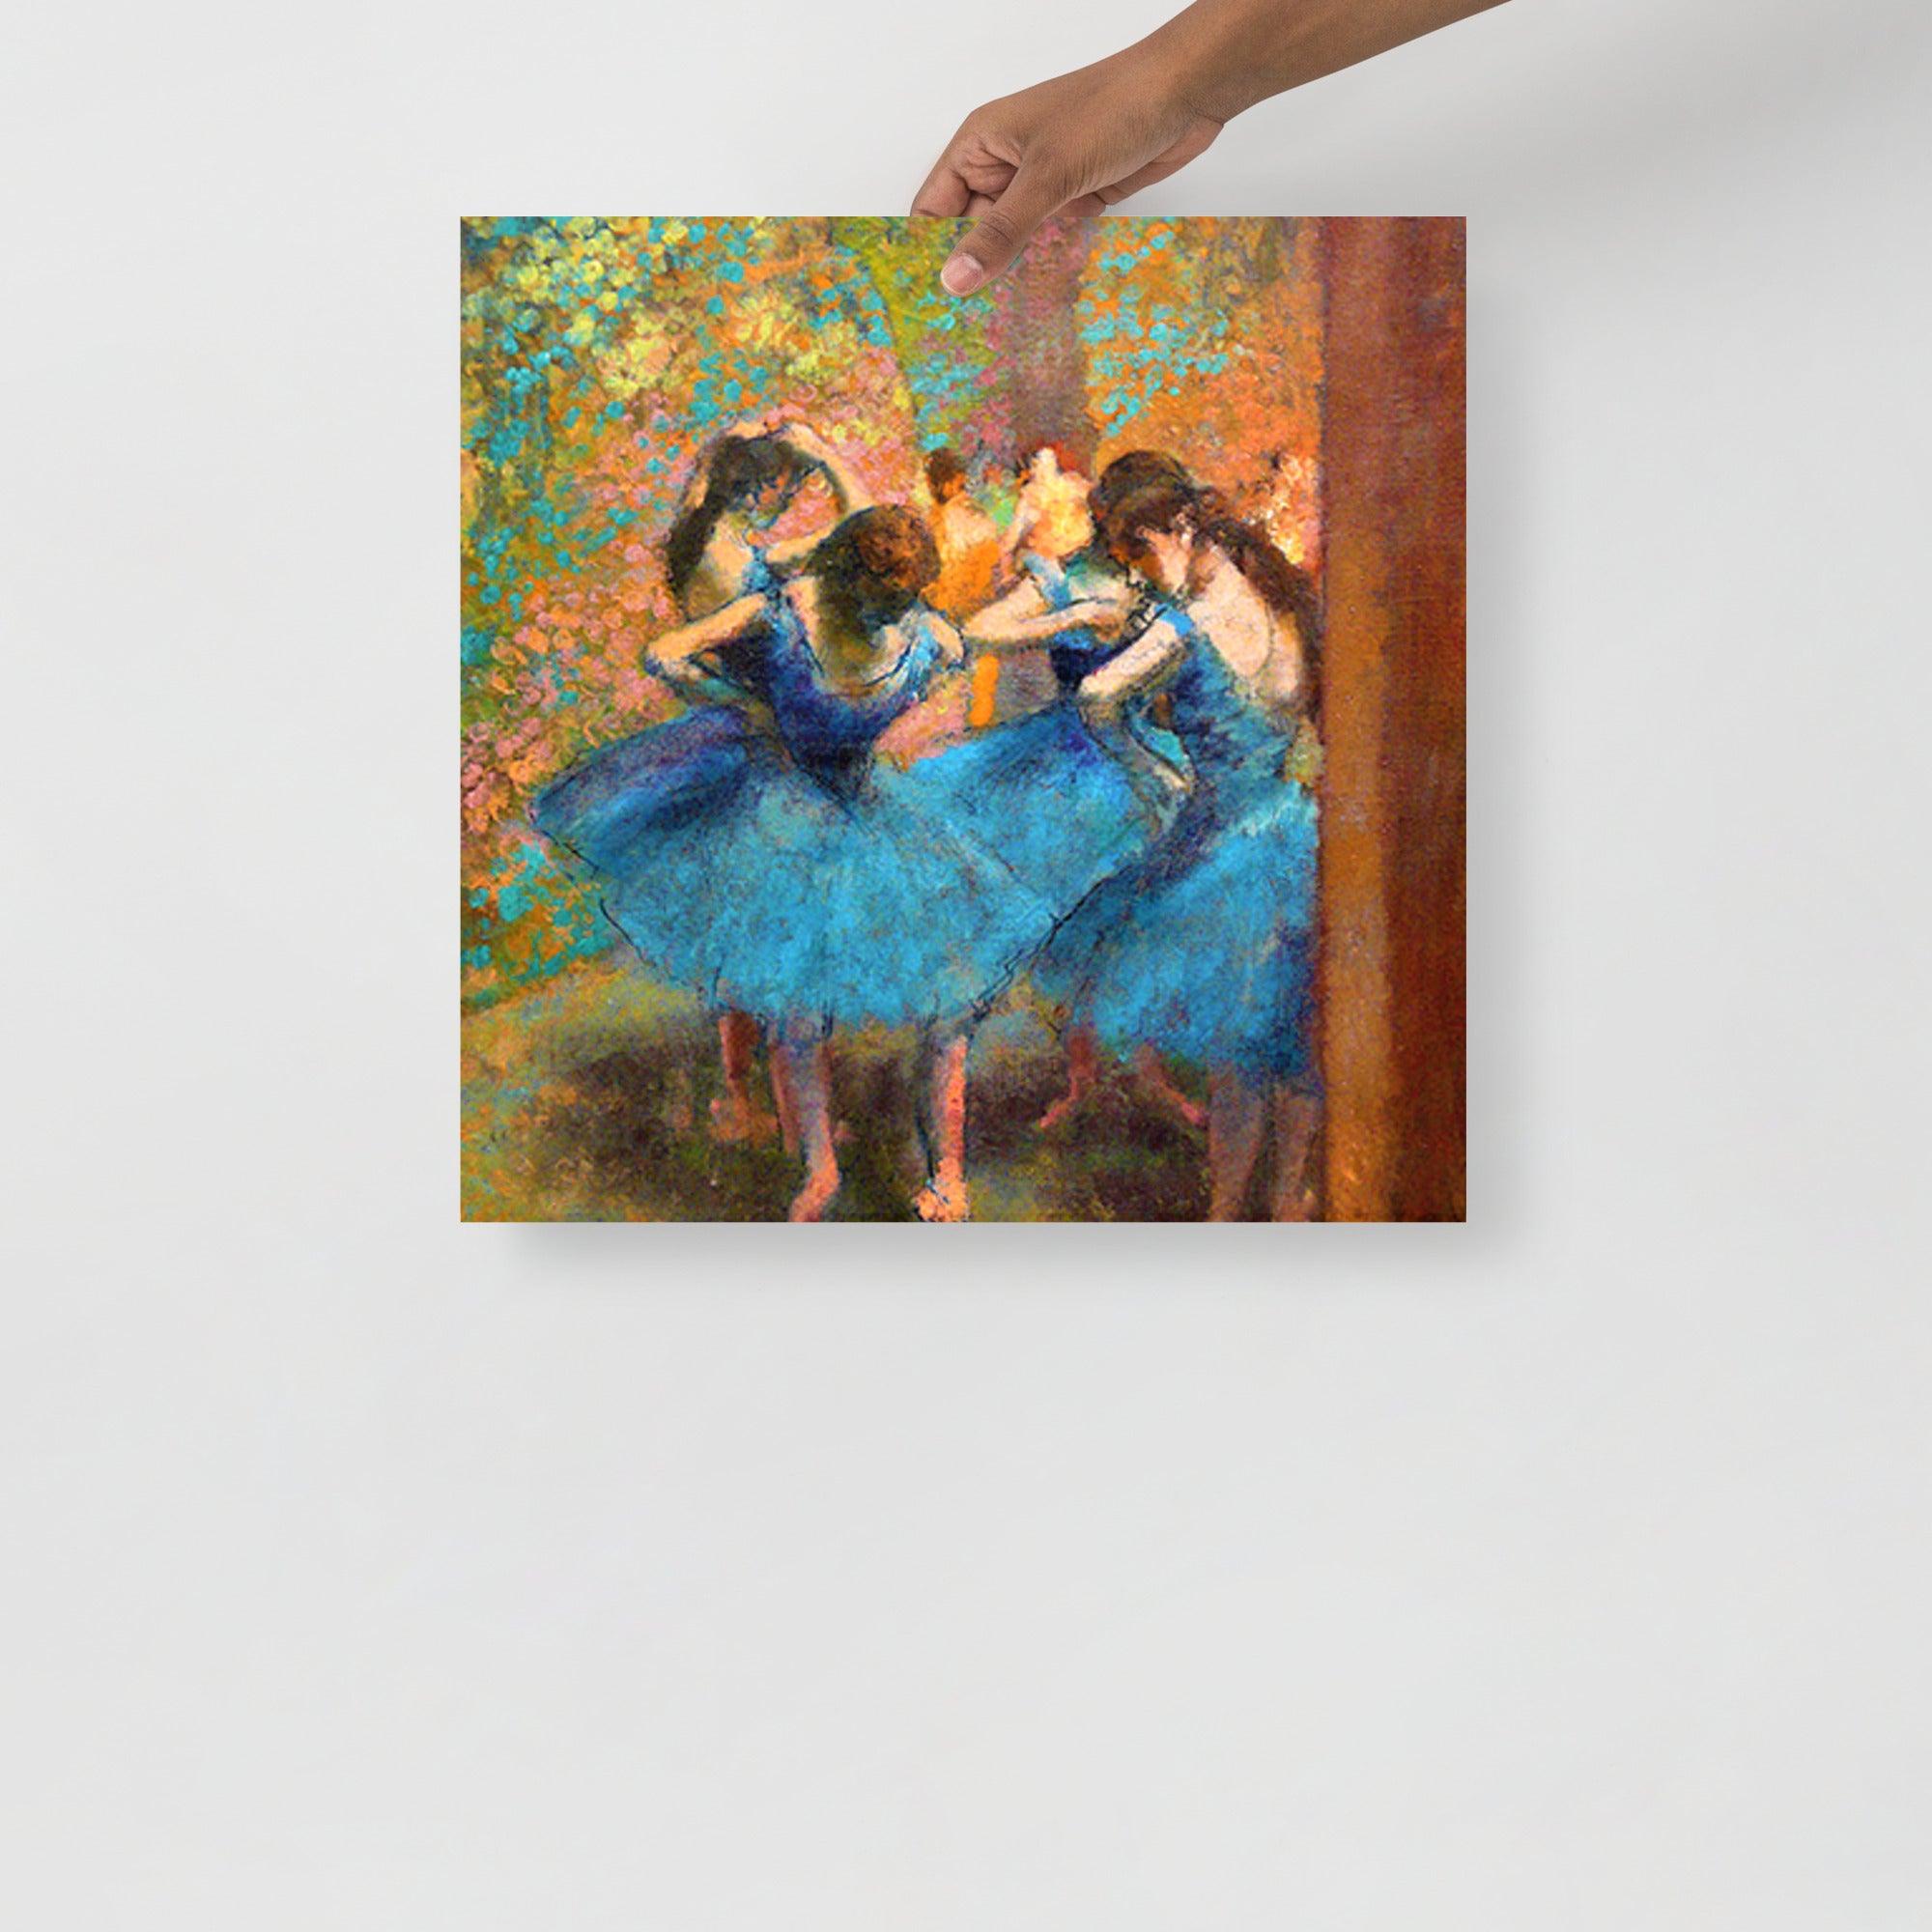 A Dancers in Blue by Edgar Degas poster on a plain backdrop in size 18x18”.